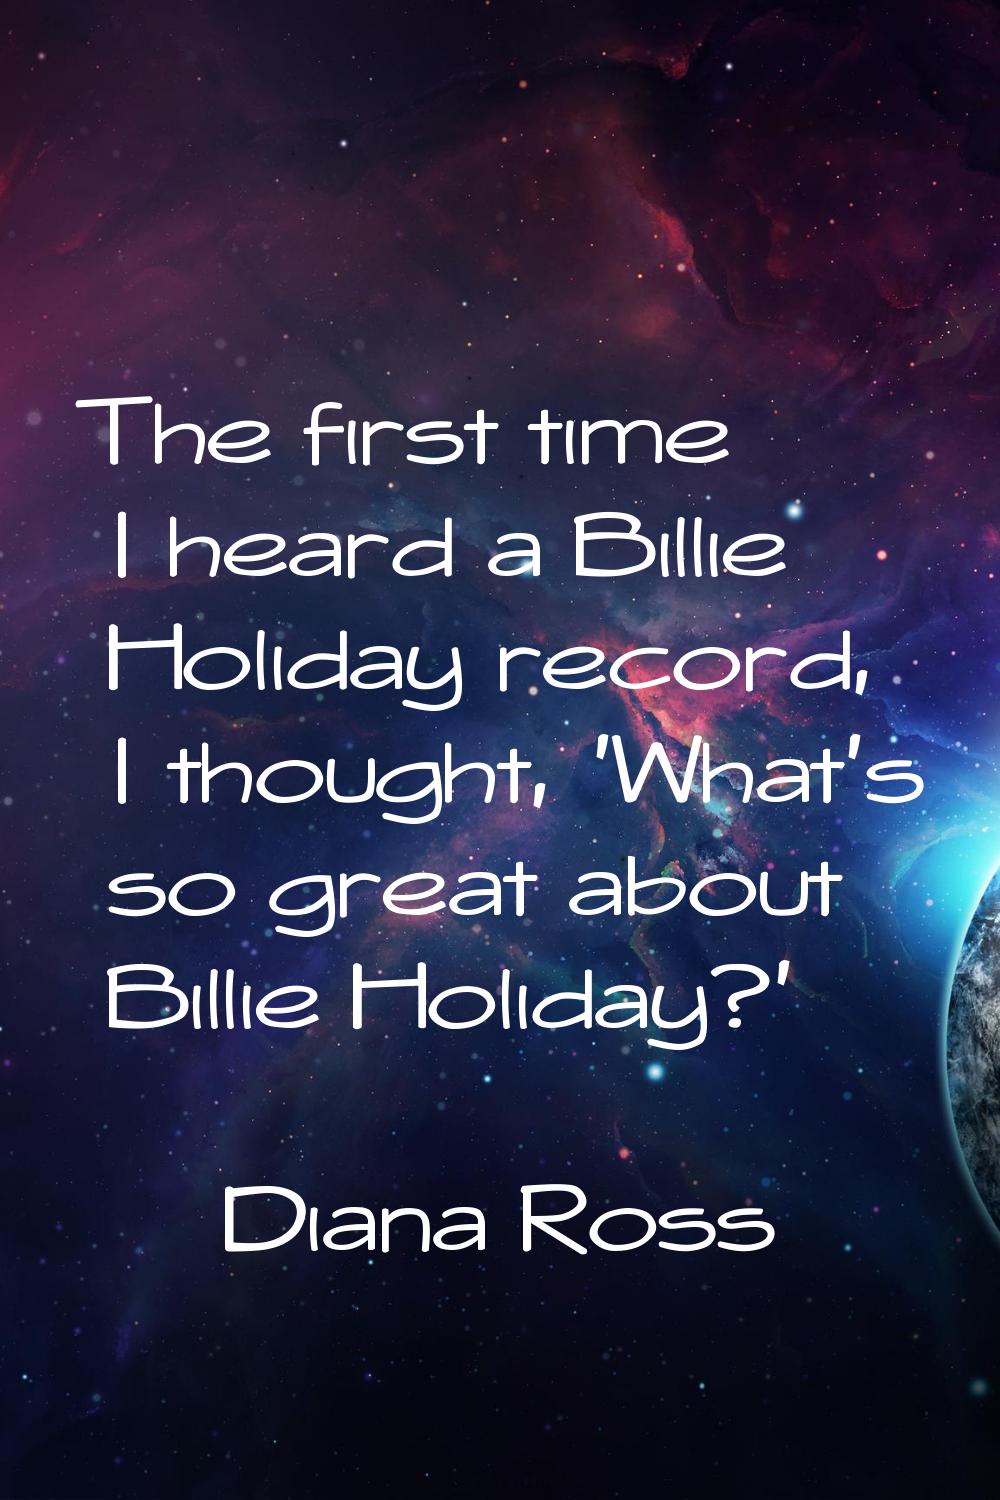 The first time I heard a Billie Holiday record, I thought, 'What's so great about Billie Holiday?'